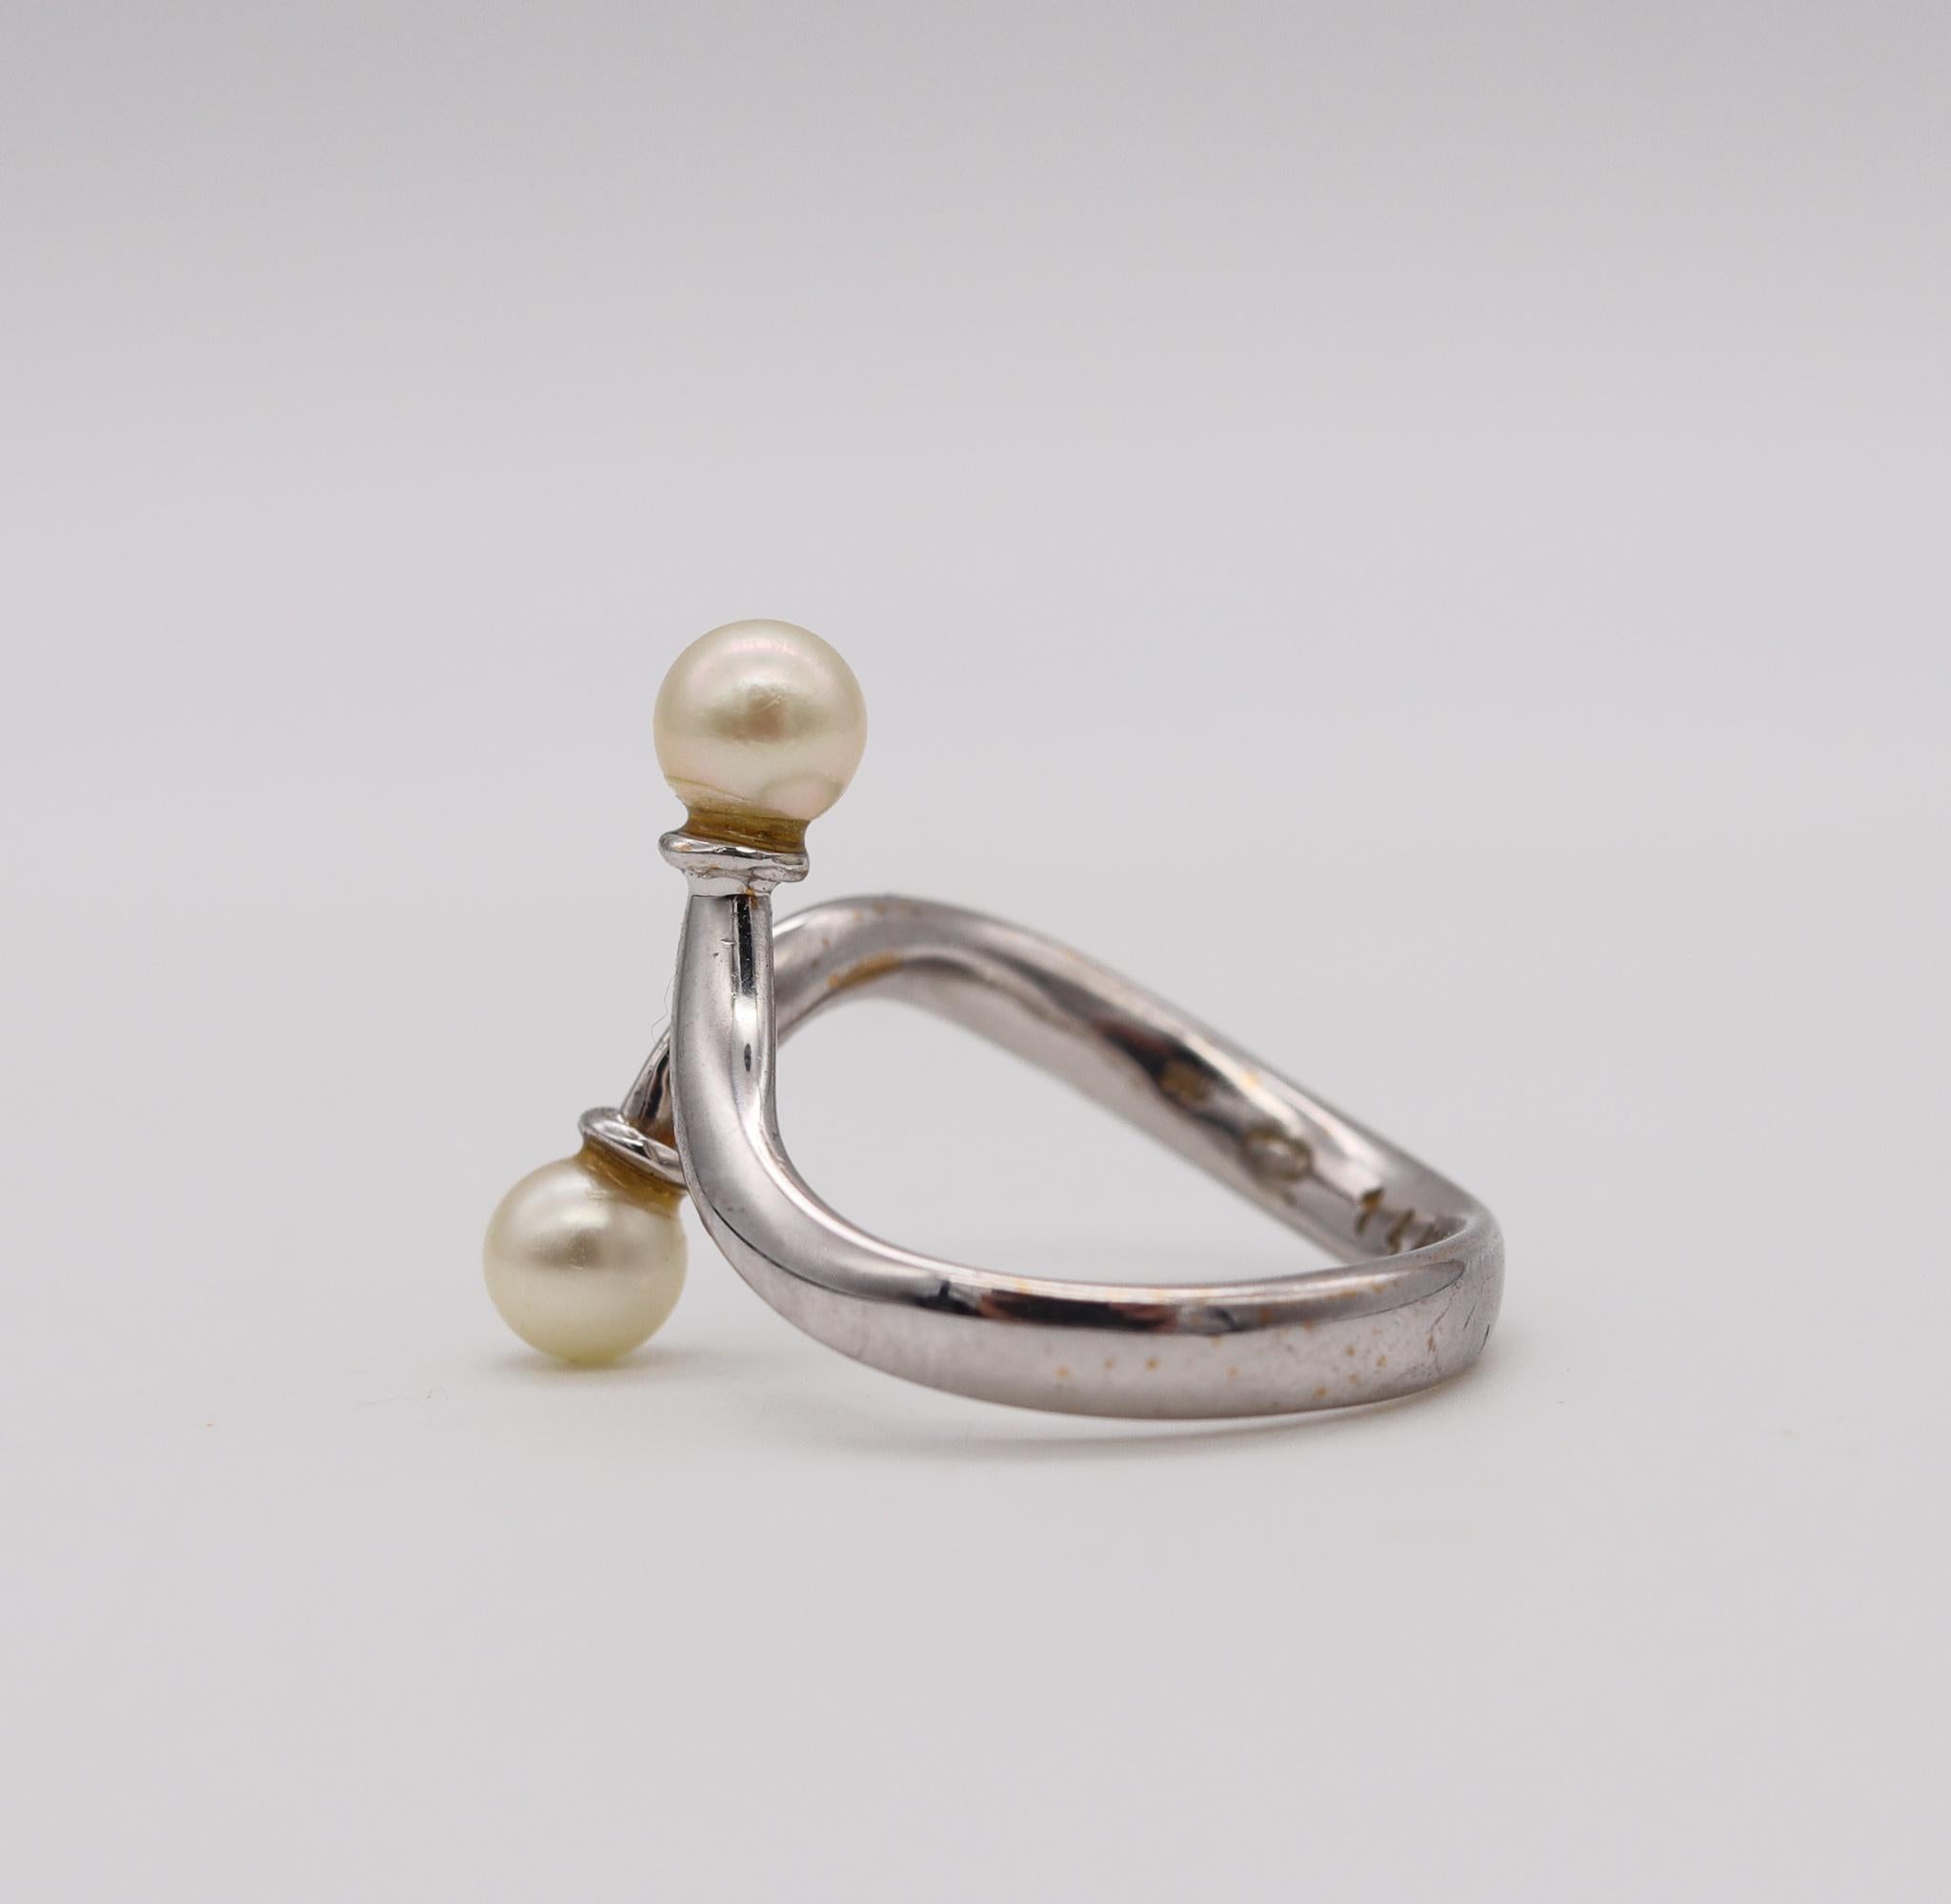 Rough Cut Vivianna Torun for Georg Jensen 1970 Free Form Ring 18kt White Gold with Pearls